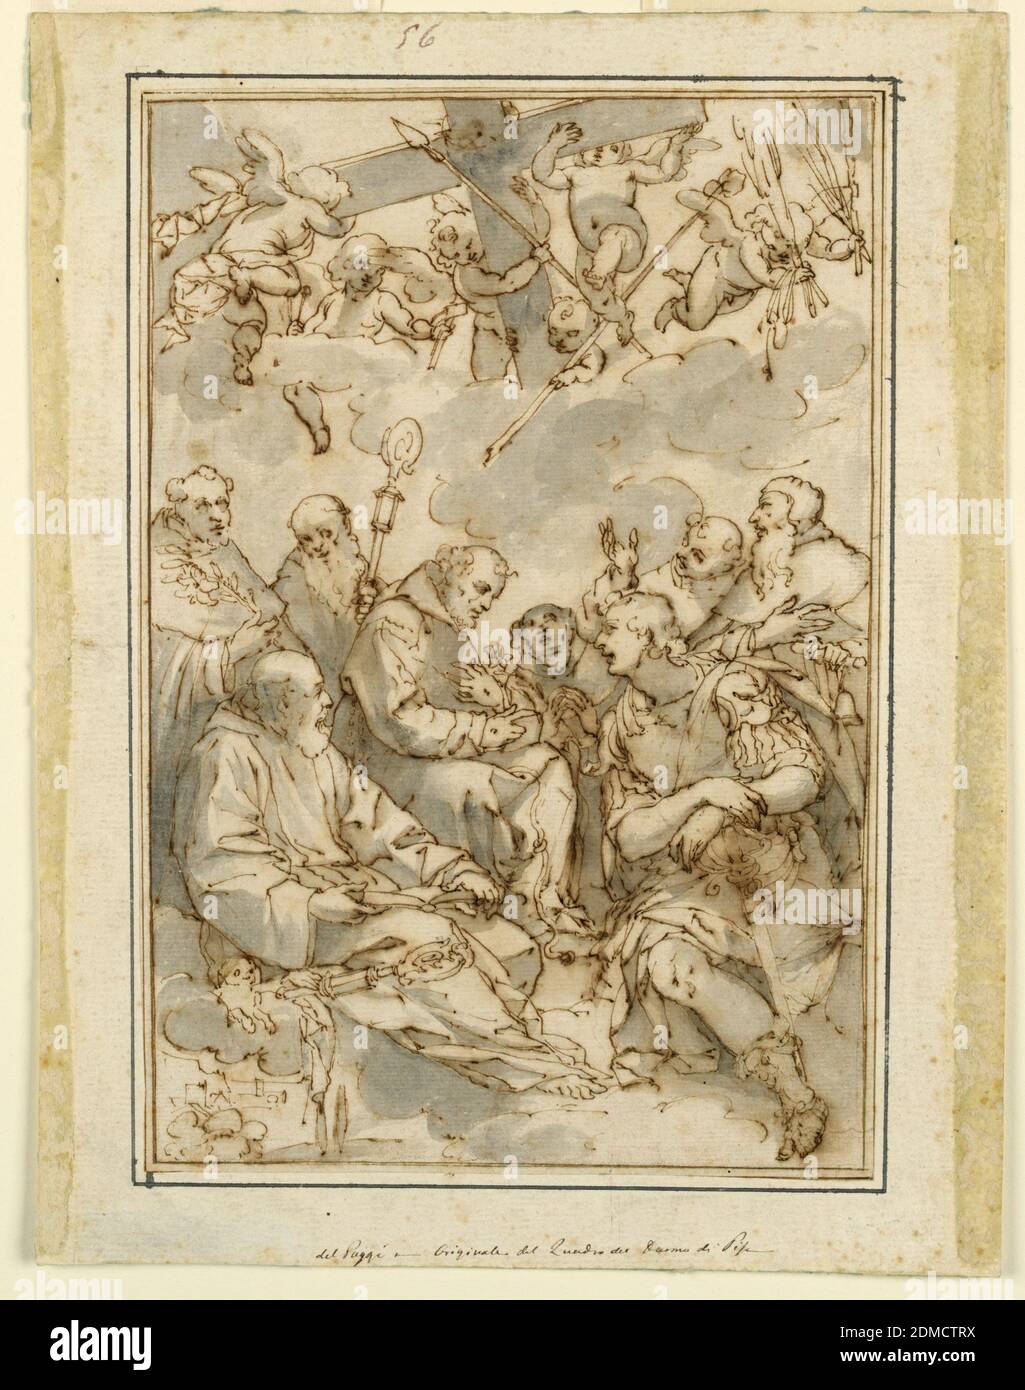 Exaltation of the Cross and Saints (Design for a Painting for the Cathedral of Pisa), Giovanni Battista Paggi, Italian, 1554 - 1627, Pen and brown ink, brush and gray wash on laid paper, Italy, ca. 1606-11, Drawing Stock Photo